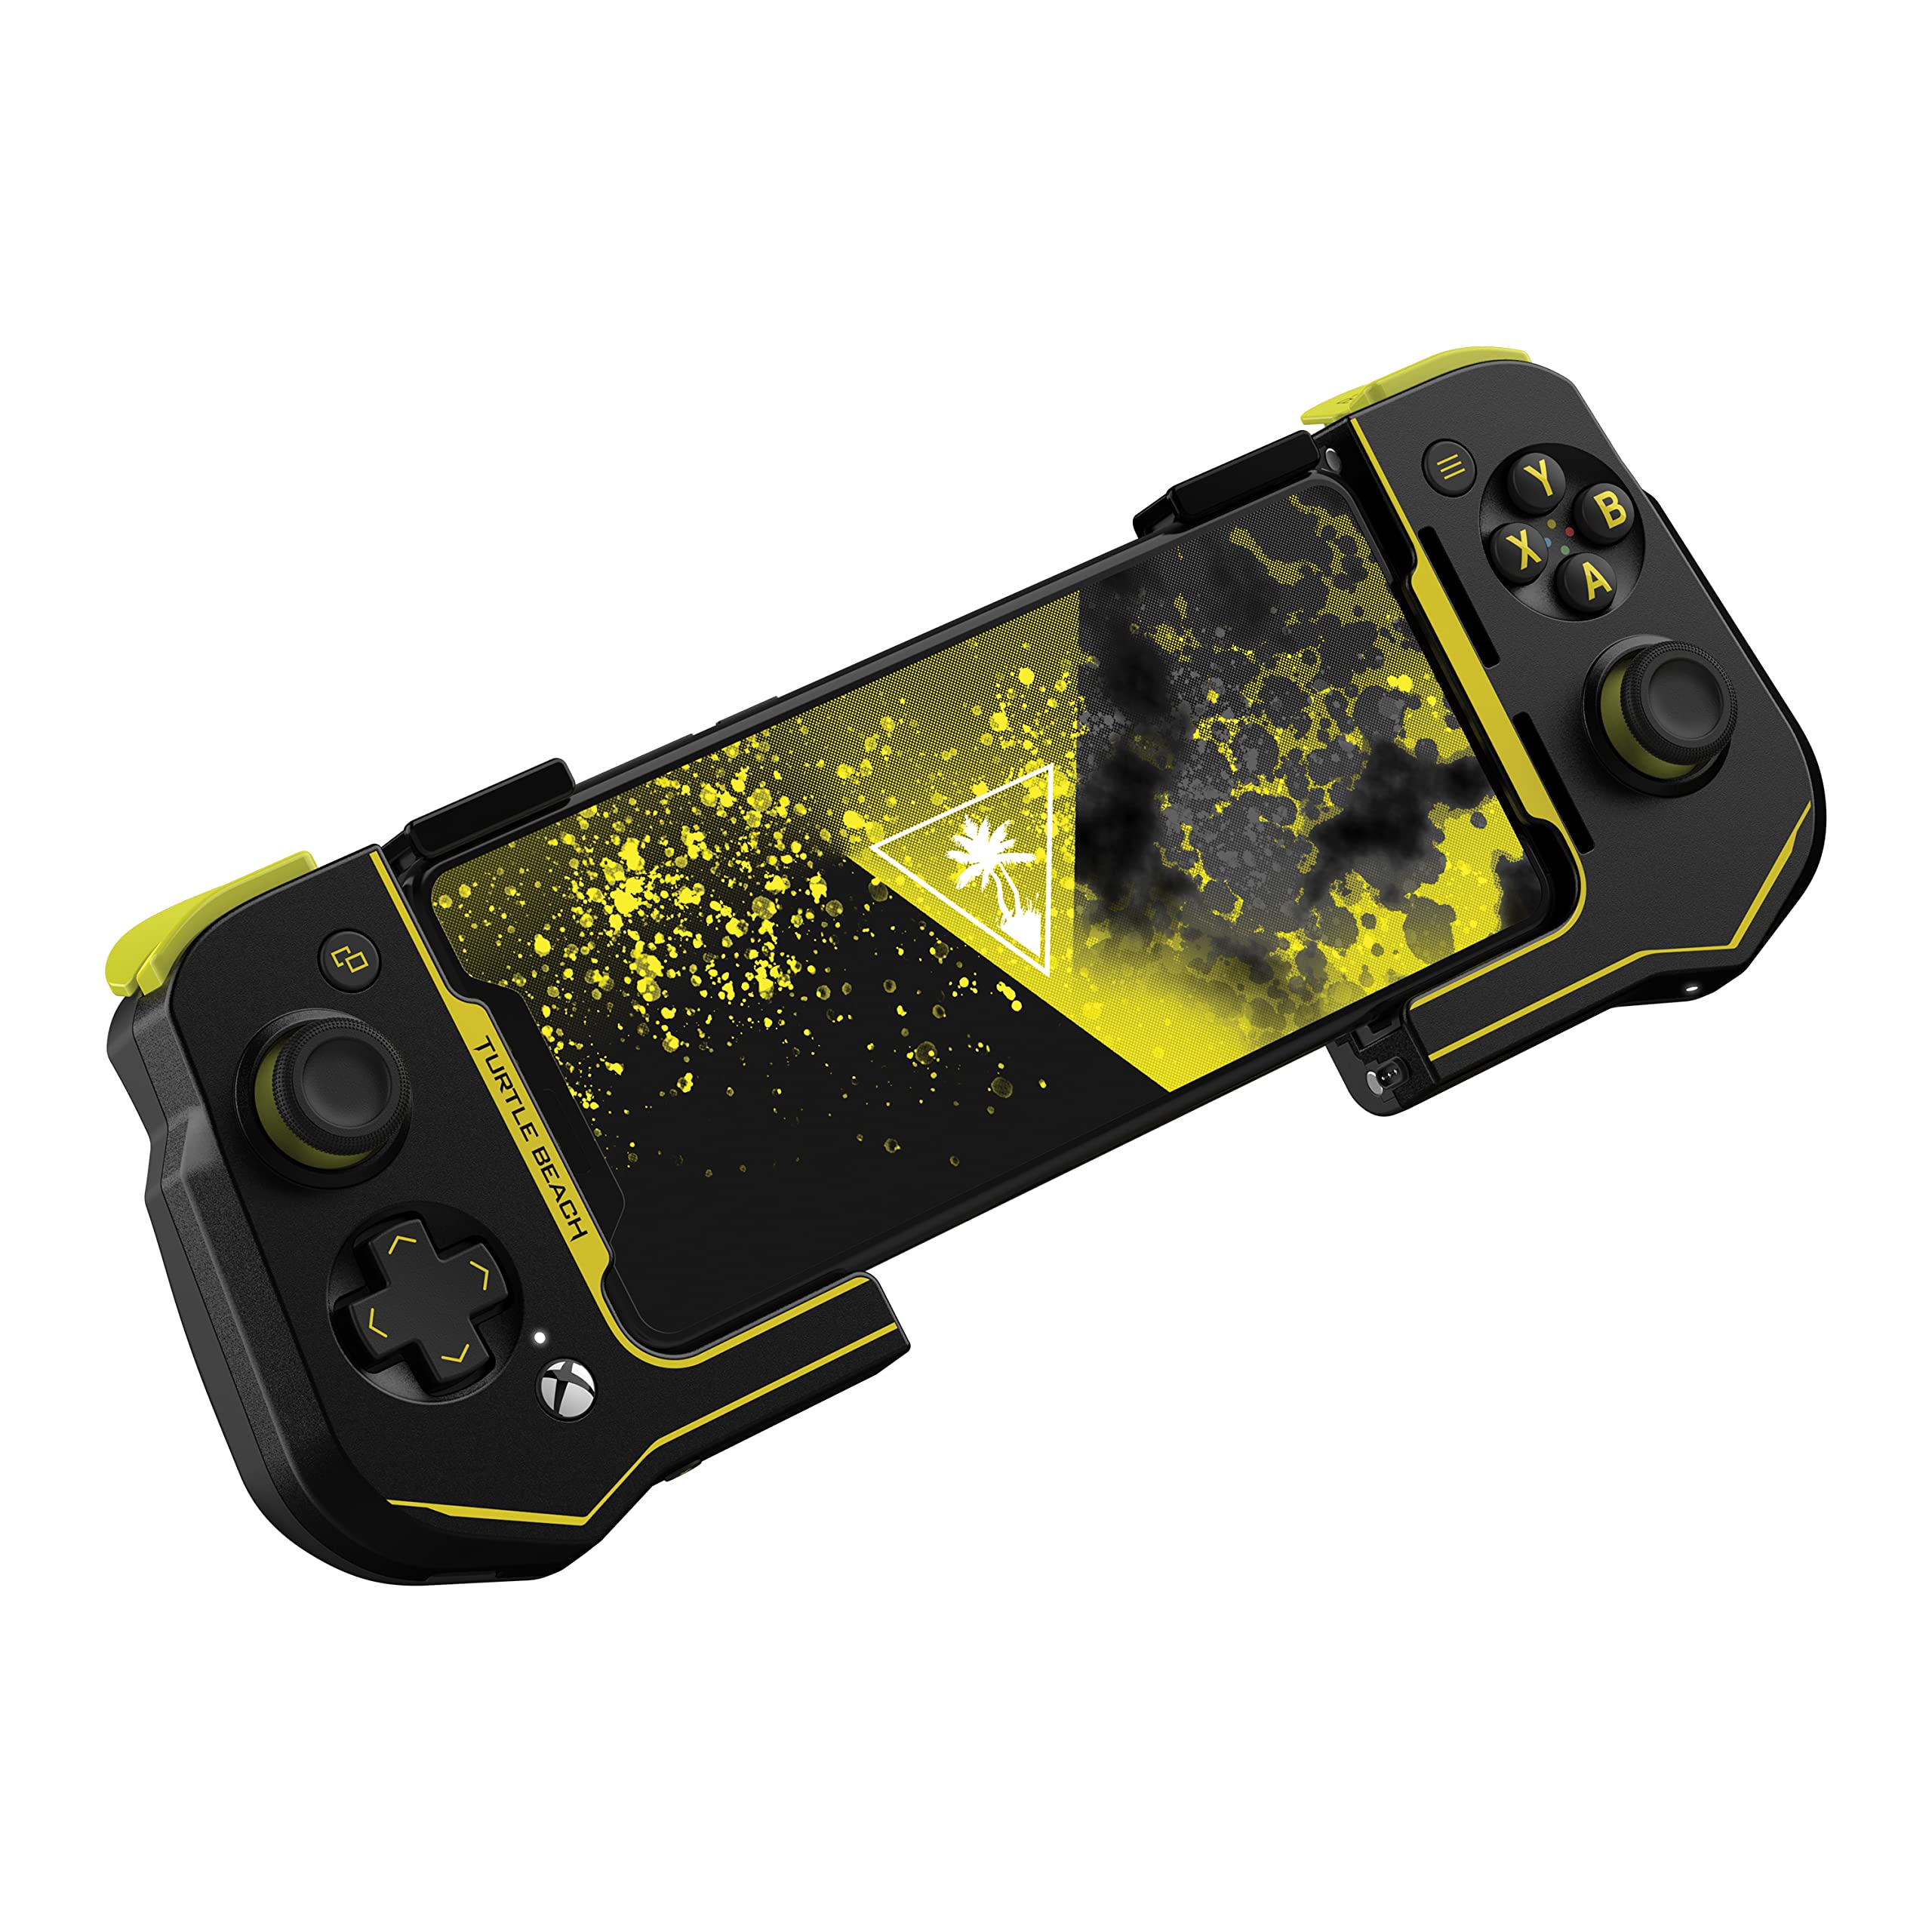 Turtle Beach Atom Mobile Game Controller with Bluetooth for Cloud Gaming on Xbox Game Pass with Android Mobile Devices - Compact Shape, and Console Style Controls – Black/Yellow